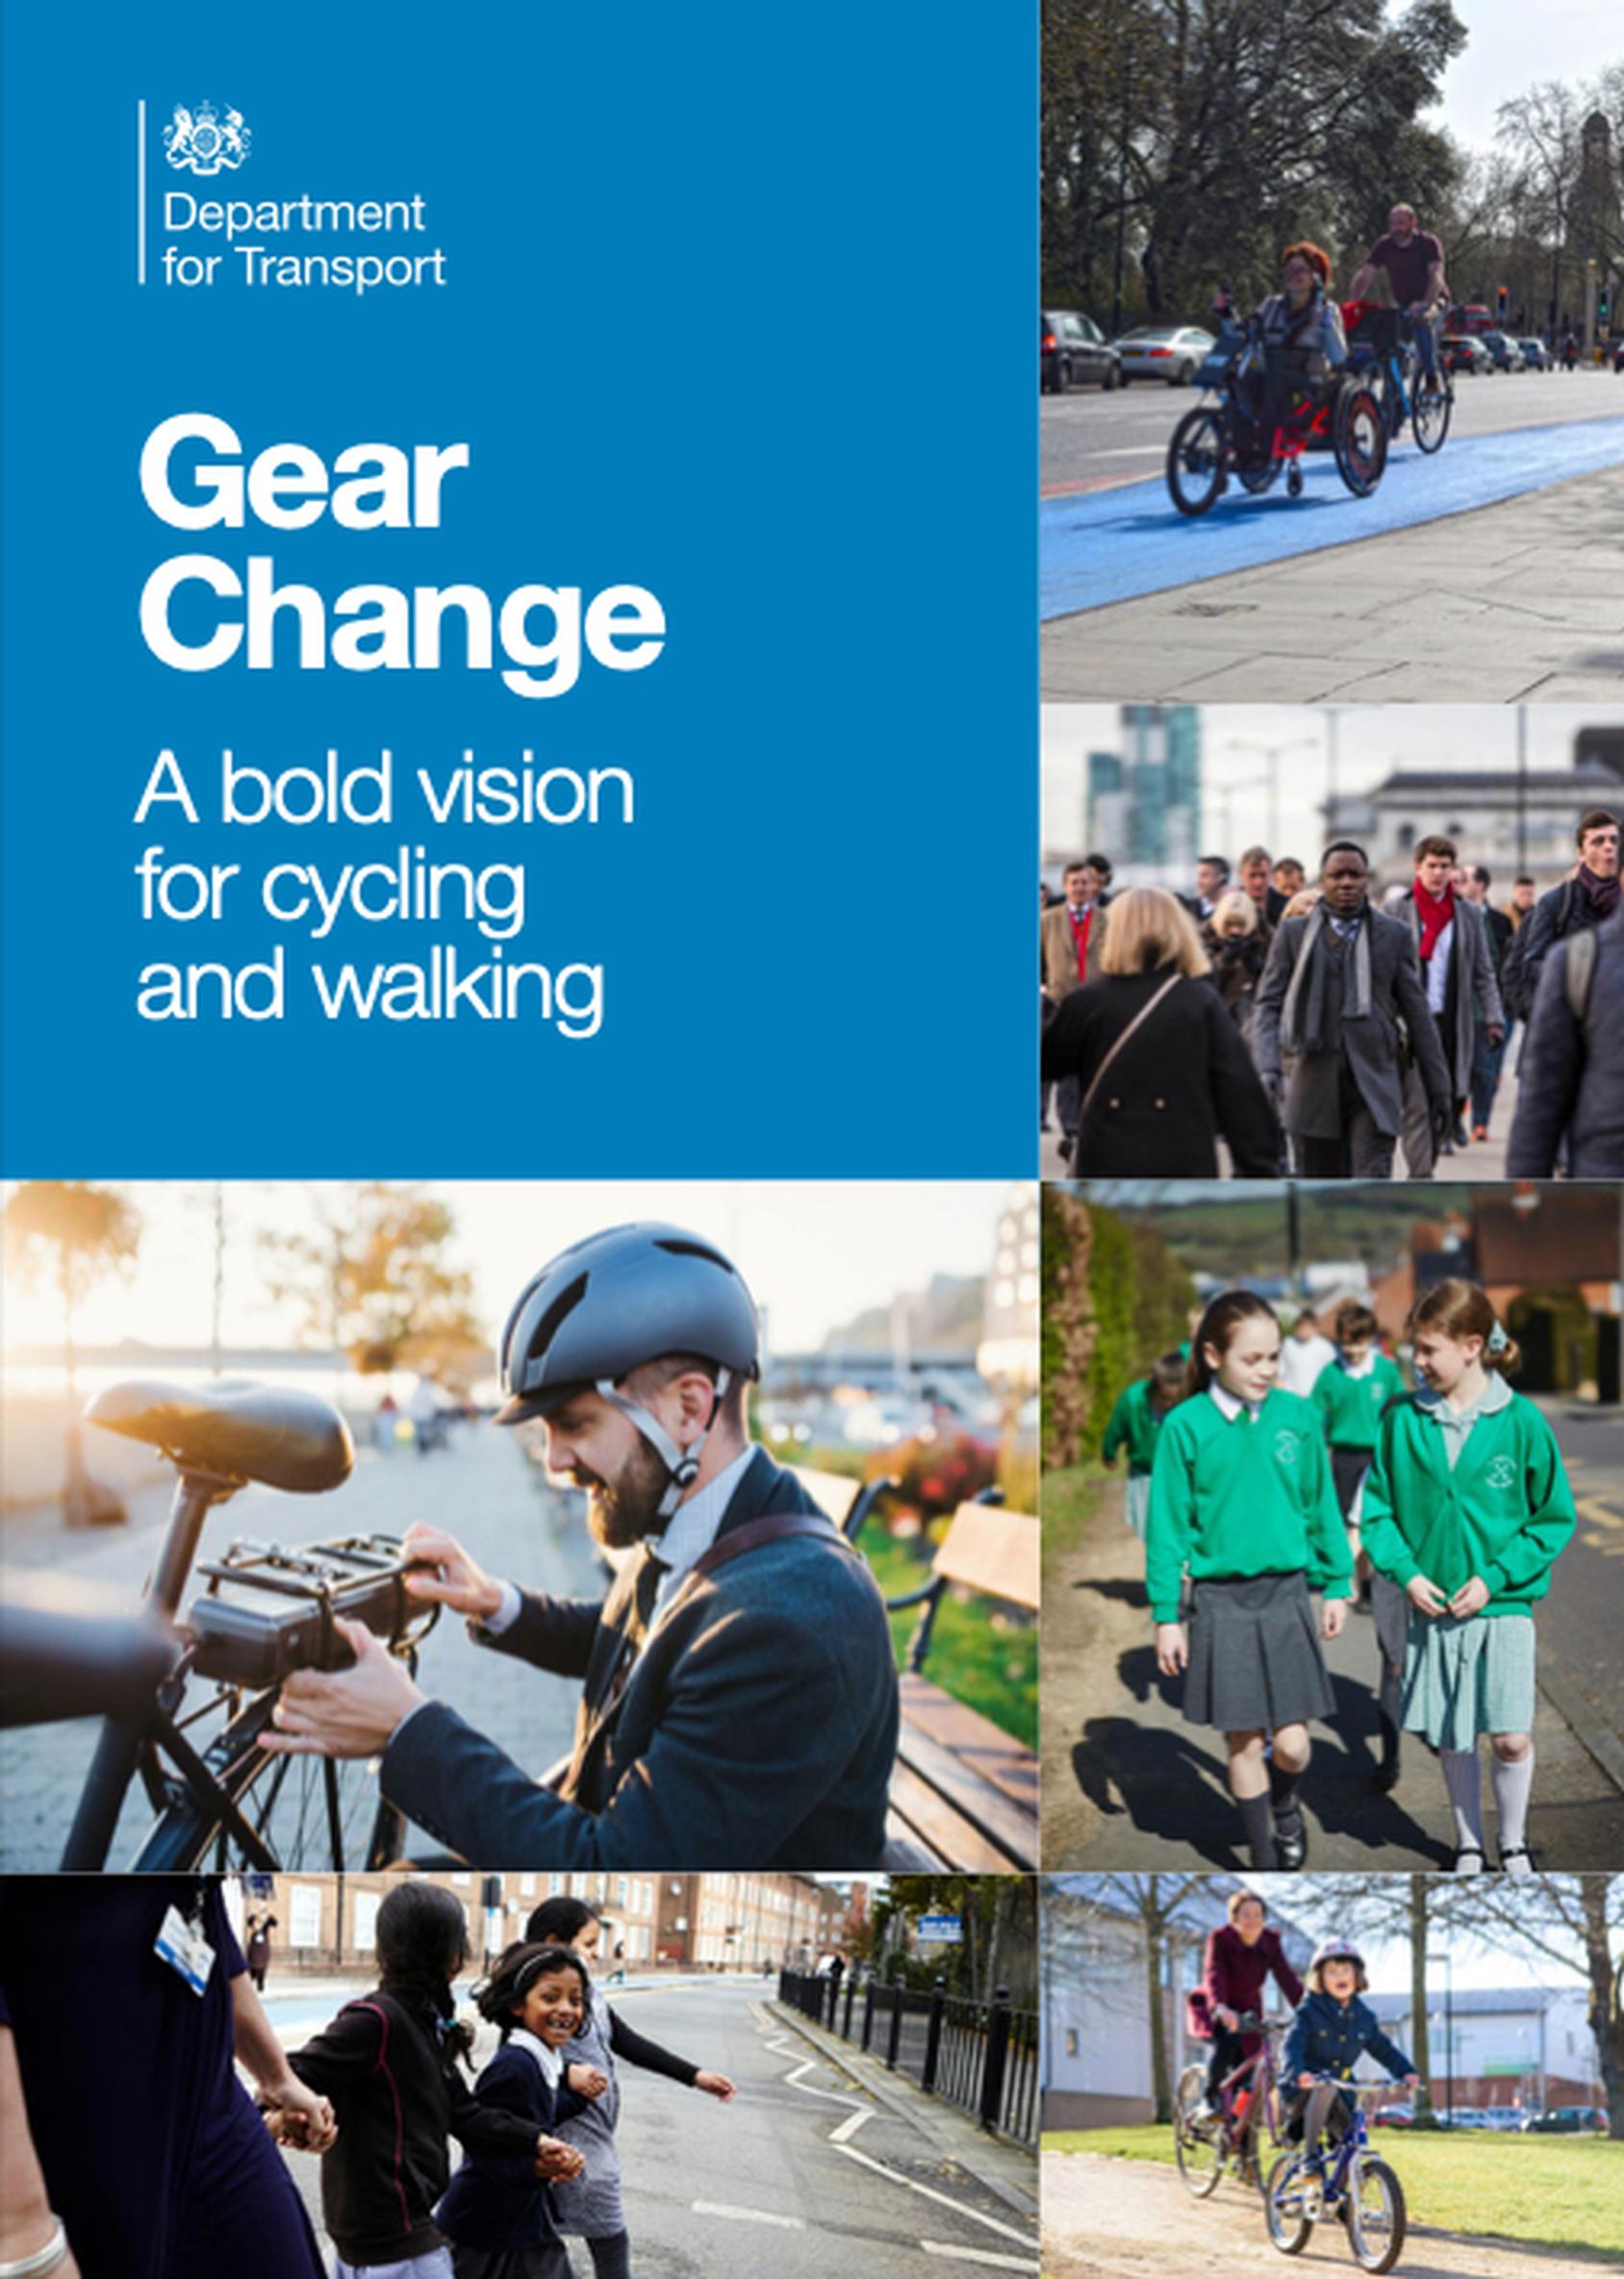 ‘We believe the most effective plan for drivers will be to get right behind the Government’s own Gear Change plan’ active travel commissioners tell PM